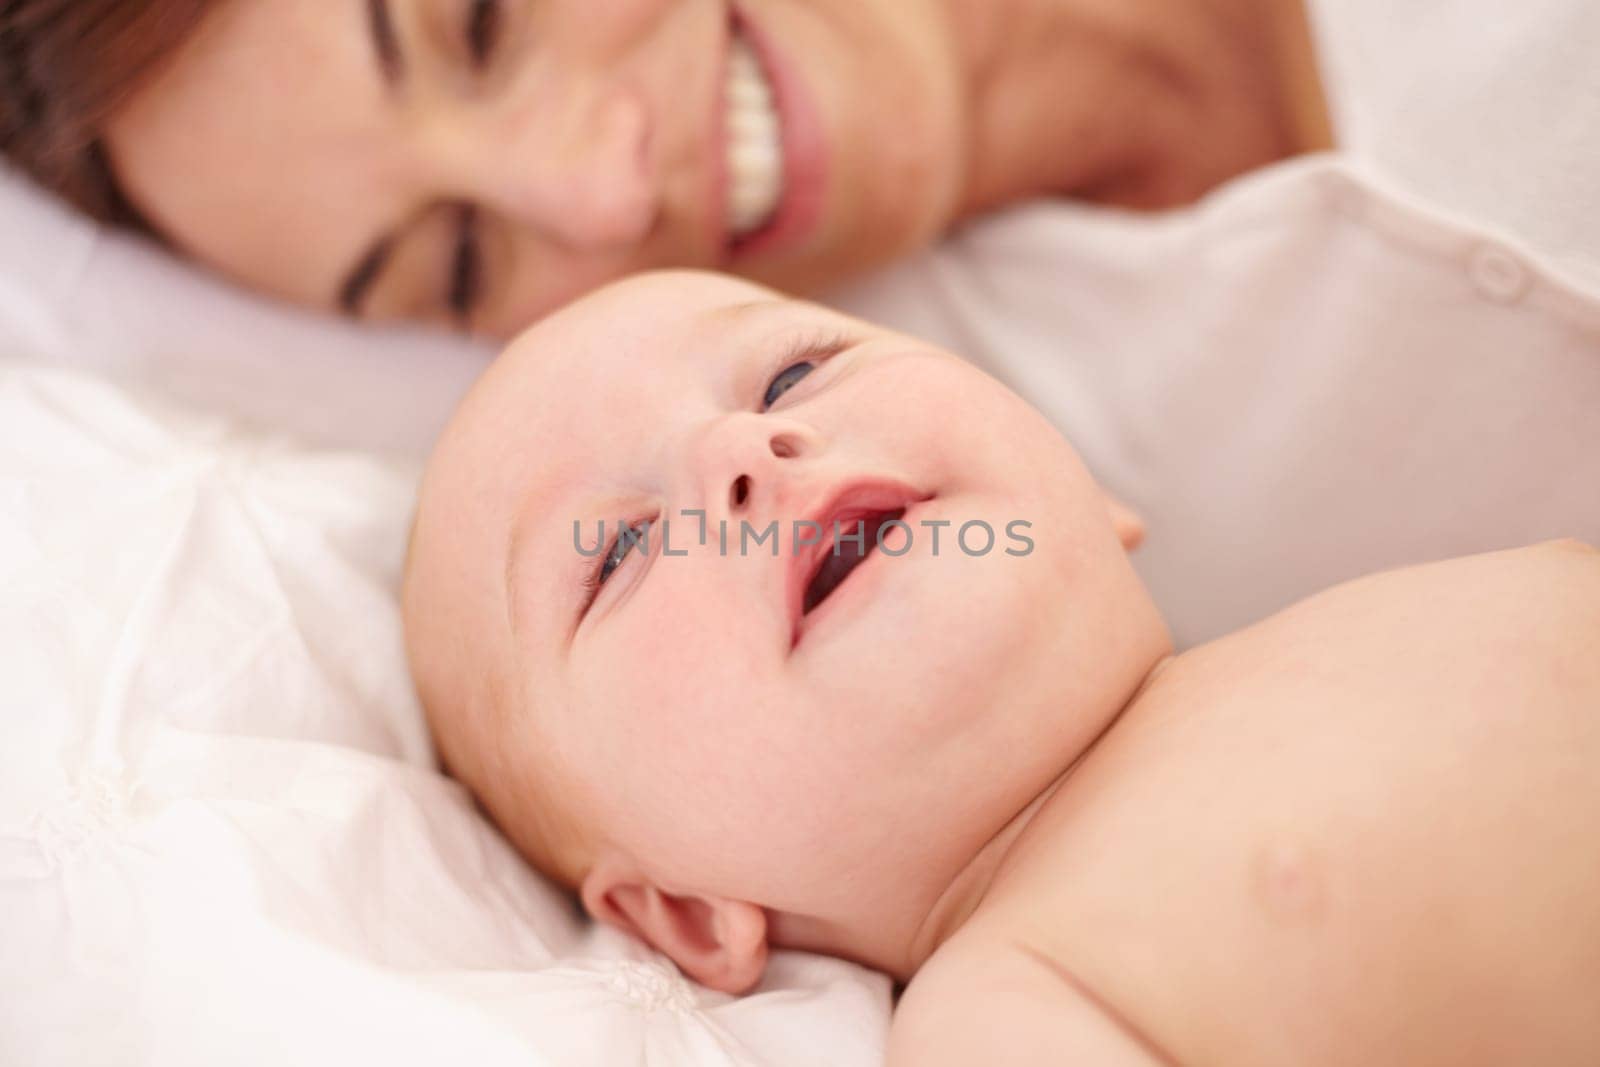 Mother, baby and happiness or love, care and relaxing on bed, bonding and joy in parenthood. Mom, newborn and peace or calm at home, positive and happy for child development, smile and rest together.